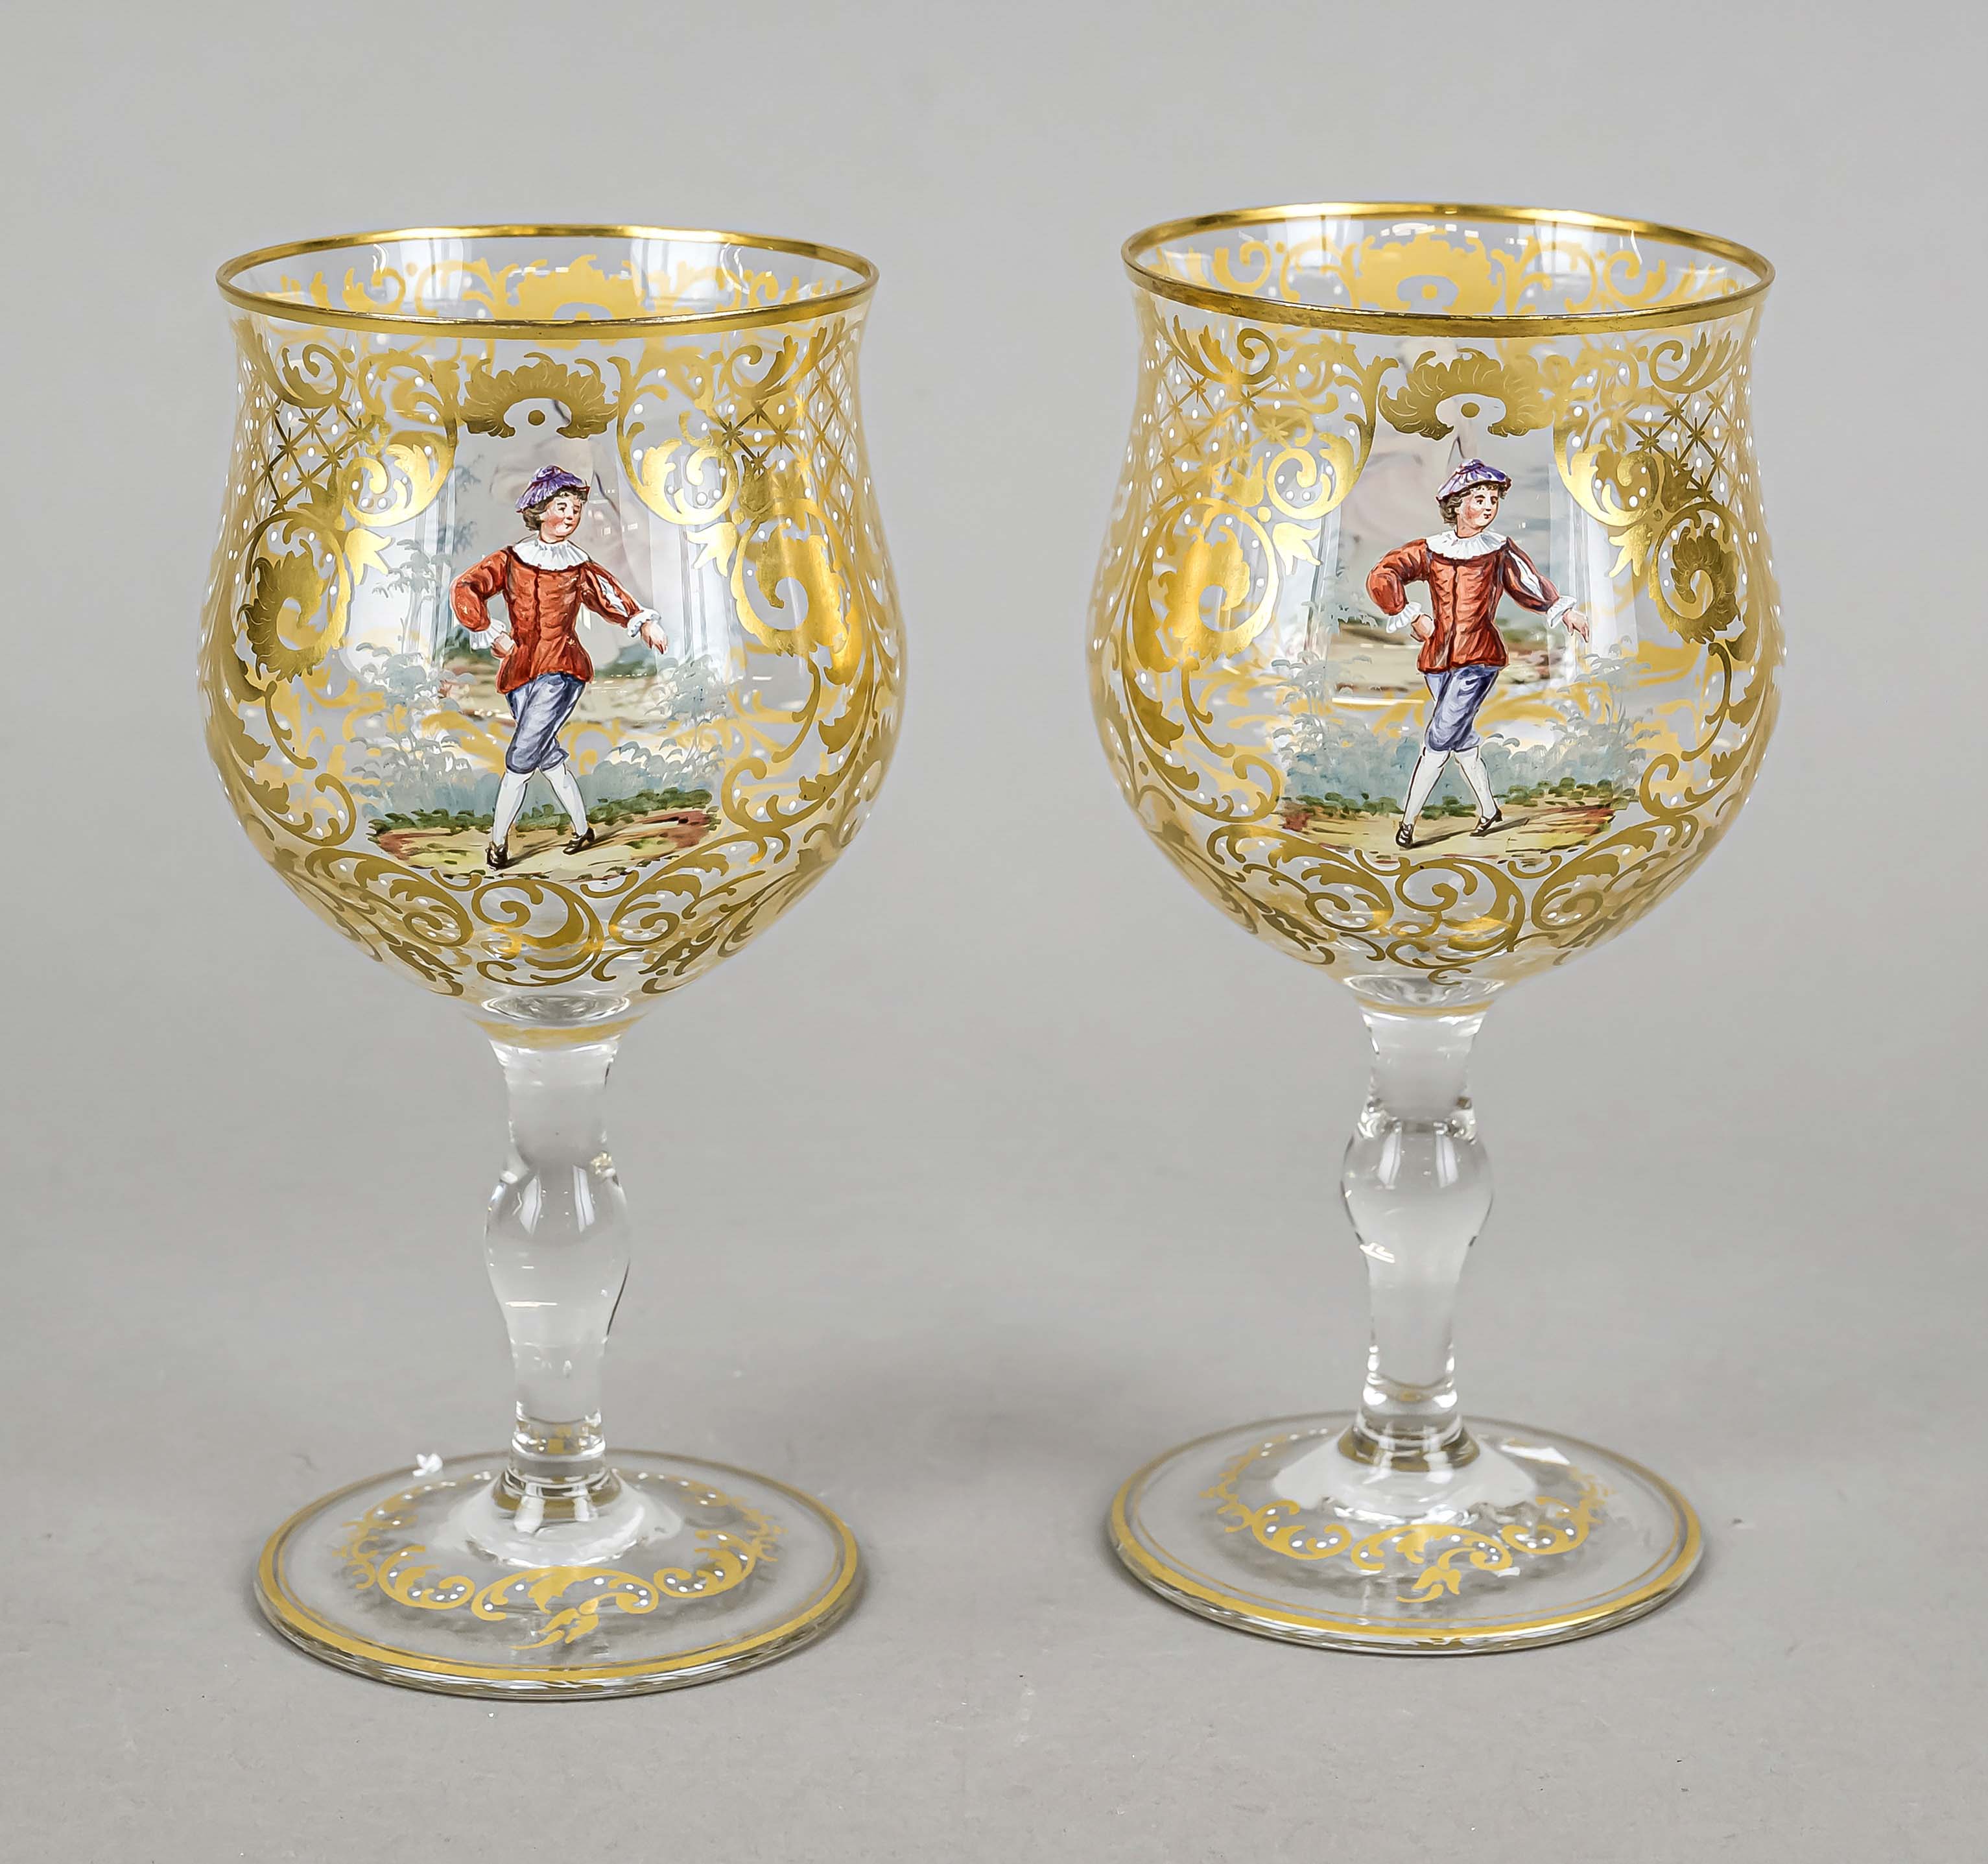 Pair of wine goblets, late 19th century, round disk stand, baluster stem, bell-shaped dome, clear